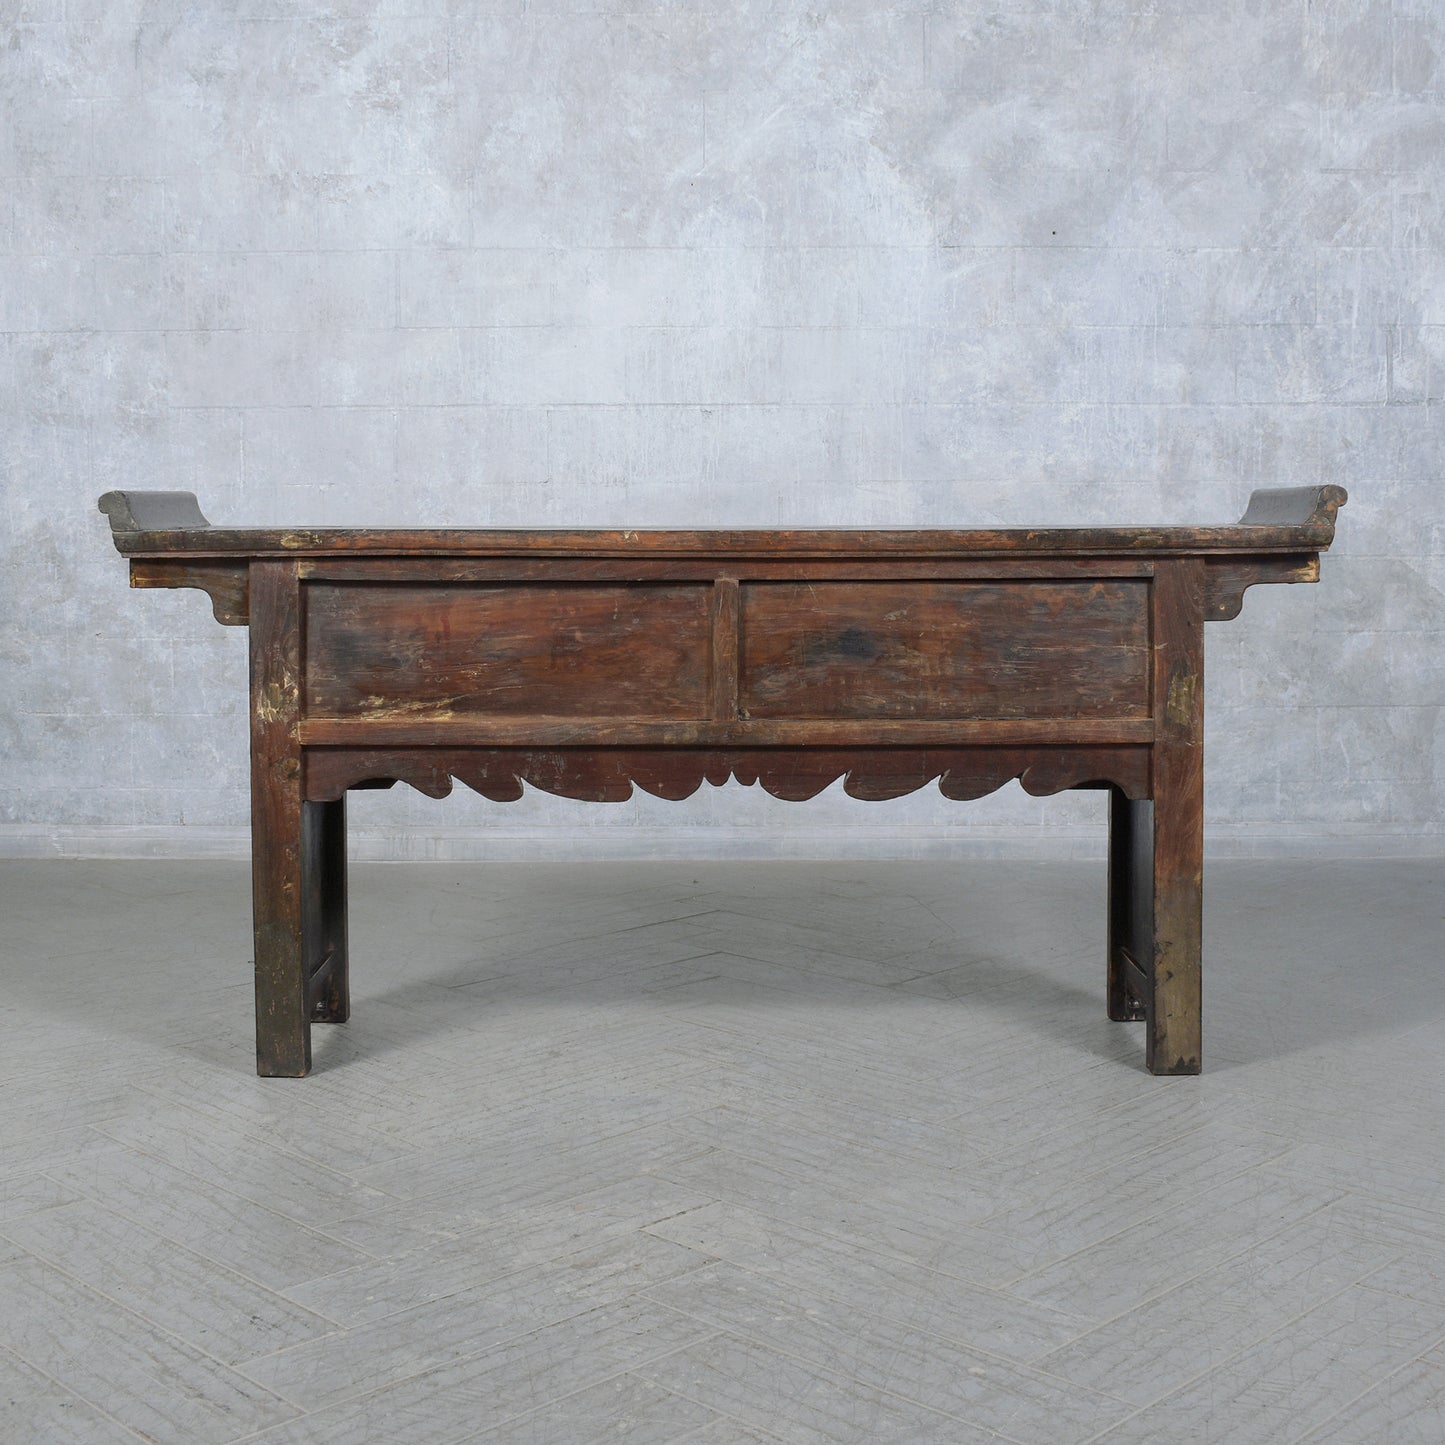 Early 20th Century Vintage Chinese Altar Console: A Testament to Timeless Craftsmanship